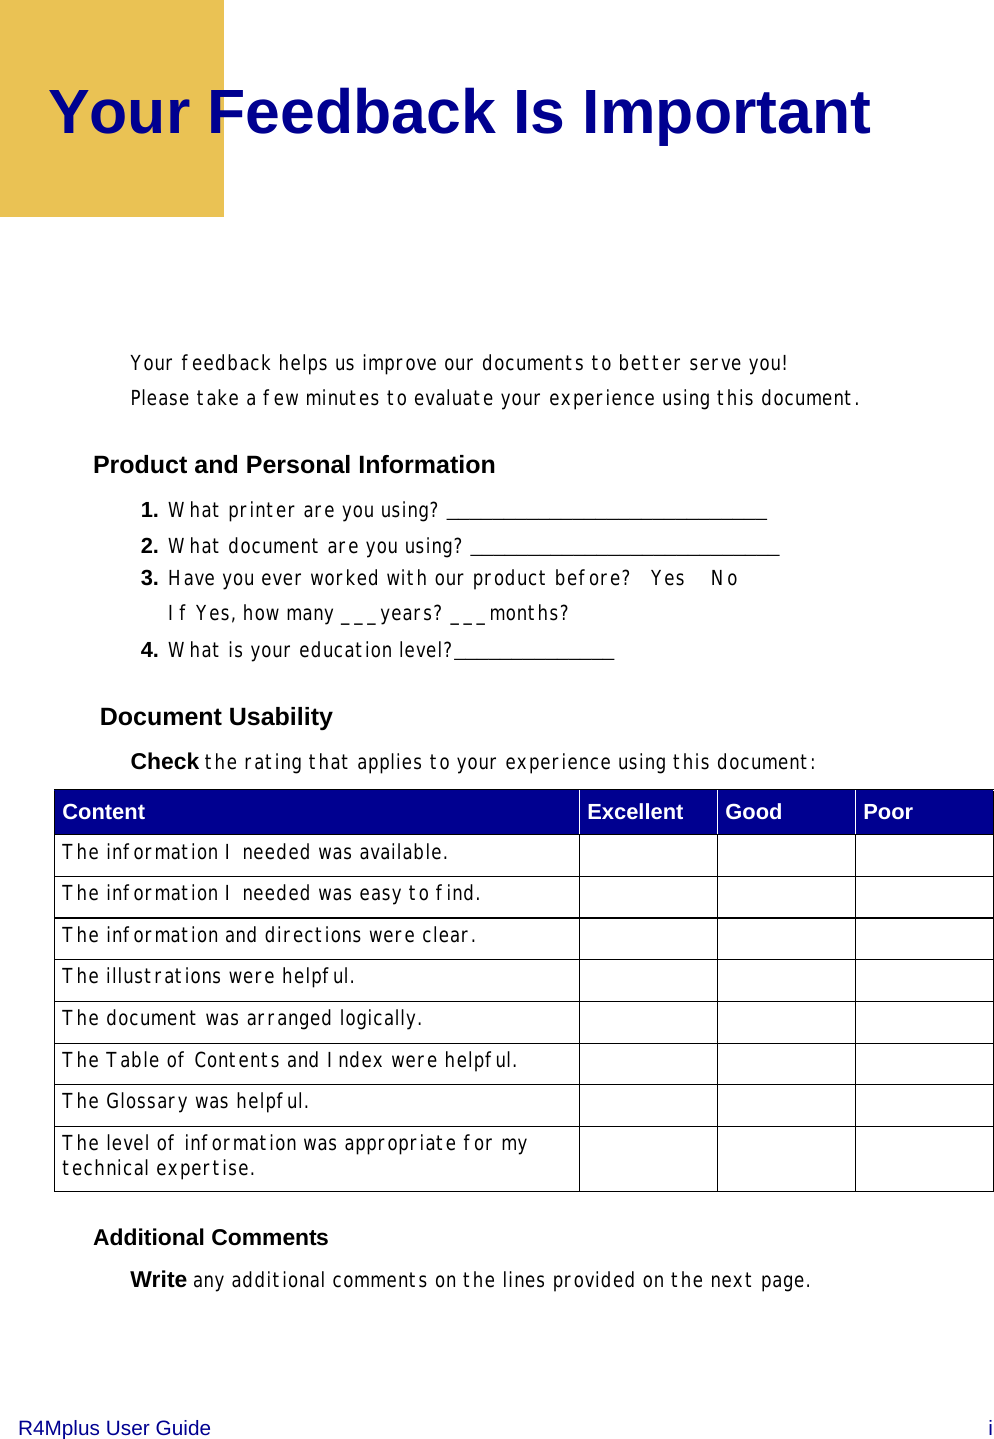 R4Mplus User Guide  iYour Feedback Is ImportantYour feedback helps us improve our documents to better serve you!Please take a few minutes to evaluate your experience using this document. Product and Personal Information1. What printer are you using? ____________________________2. What document are you using? ___________________________3. Have you ever worked with our product before?   Yes    NoIf Yes, how many ___years? ___months?4. What is your education level?______________ Document UsabilityCheck the rating that applies to your experience using this document: Additional Comments Write any additional comments on the lines provided on the next page.Content Excellent Good PoorThe information I needed was available.The information I needed was easy to find.The information and directions were clear.The illustrations were helpful.The document was arranged logically.The Table of Contents and Index were helpful.The Glossary was helpful.The level of information was appropriate for my technical expertise. 